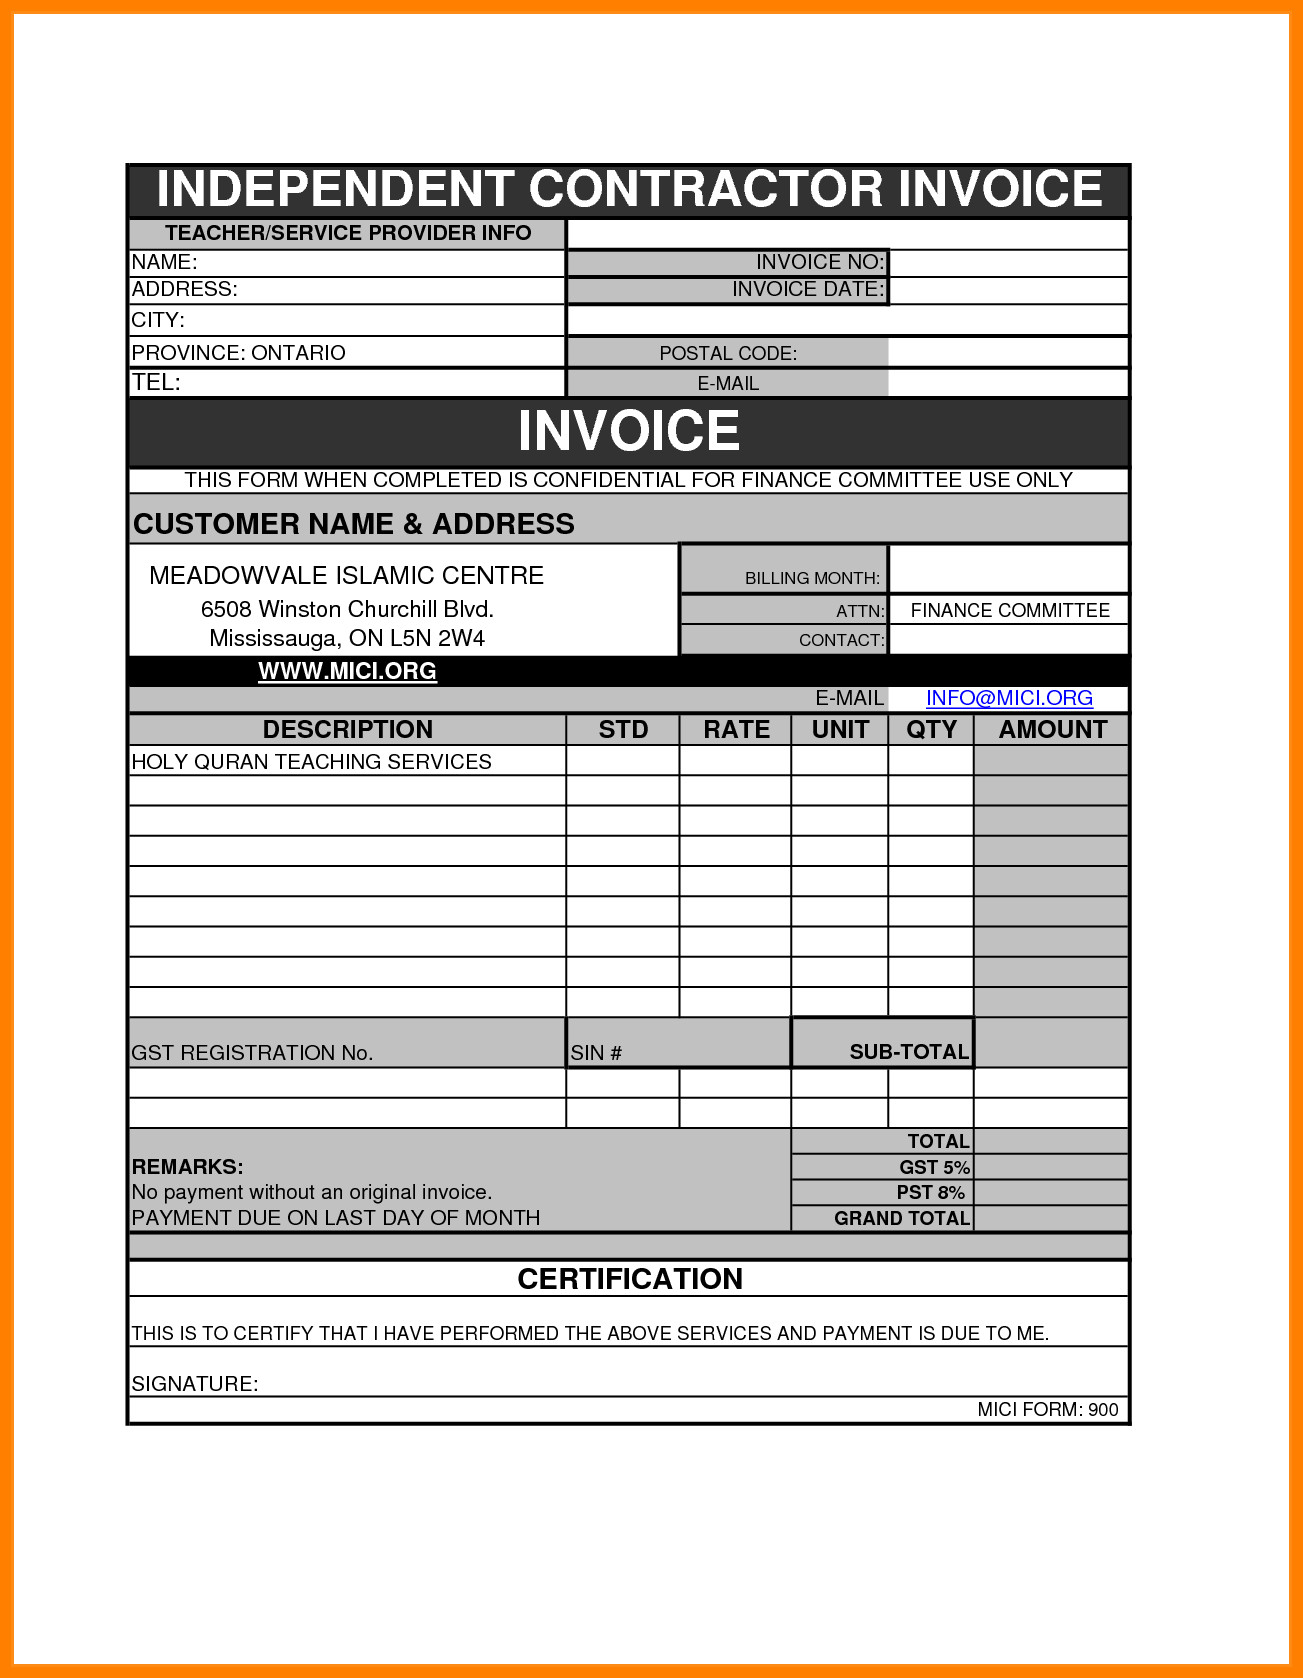 7 independent contractor invoice